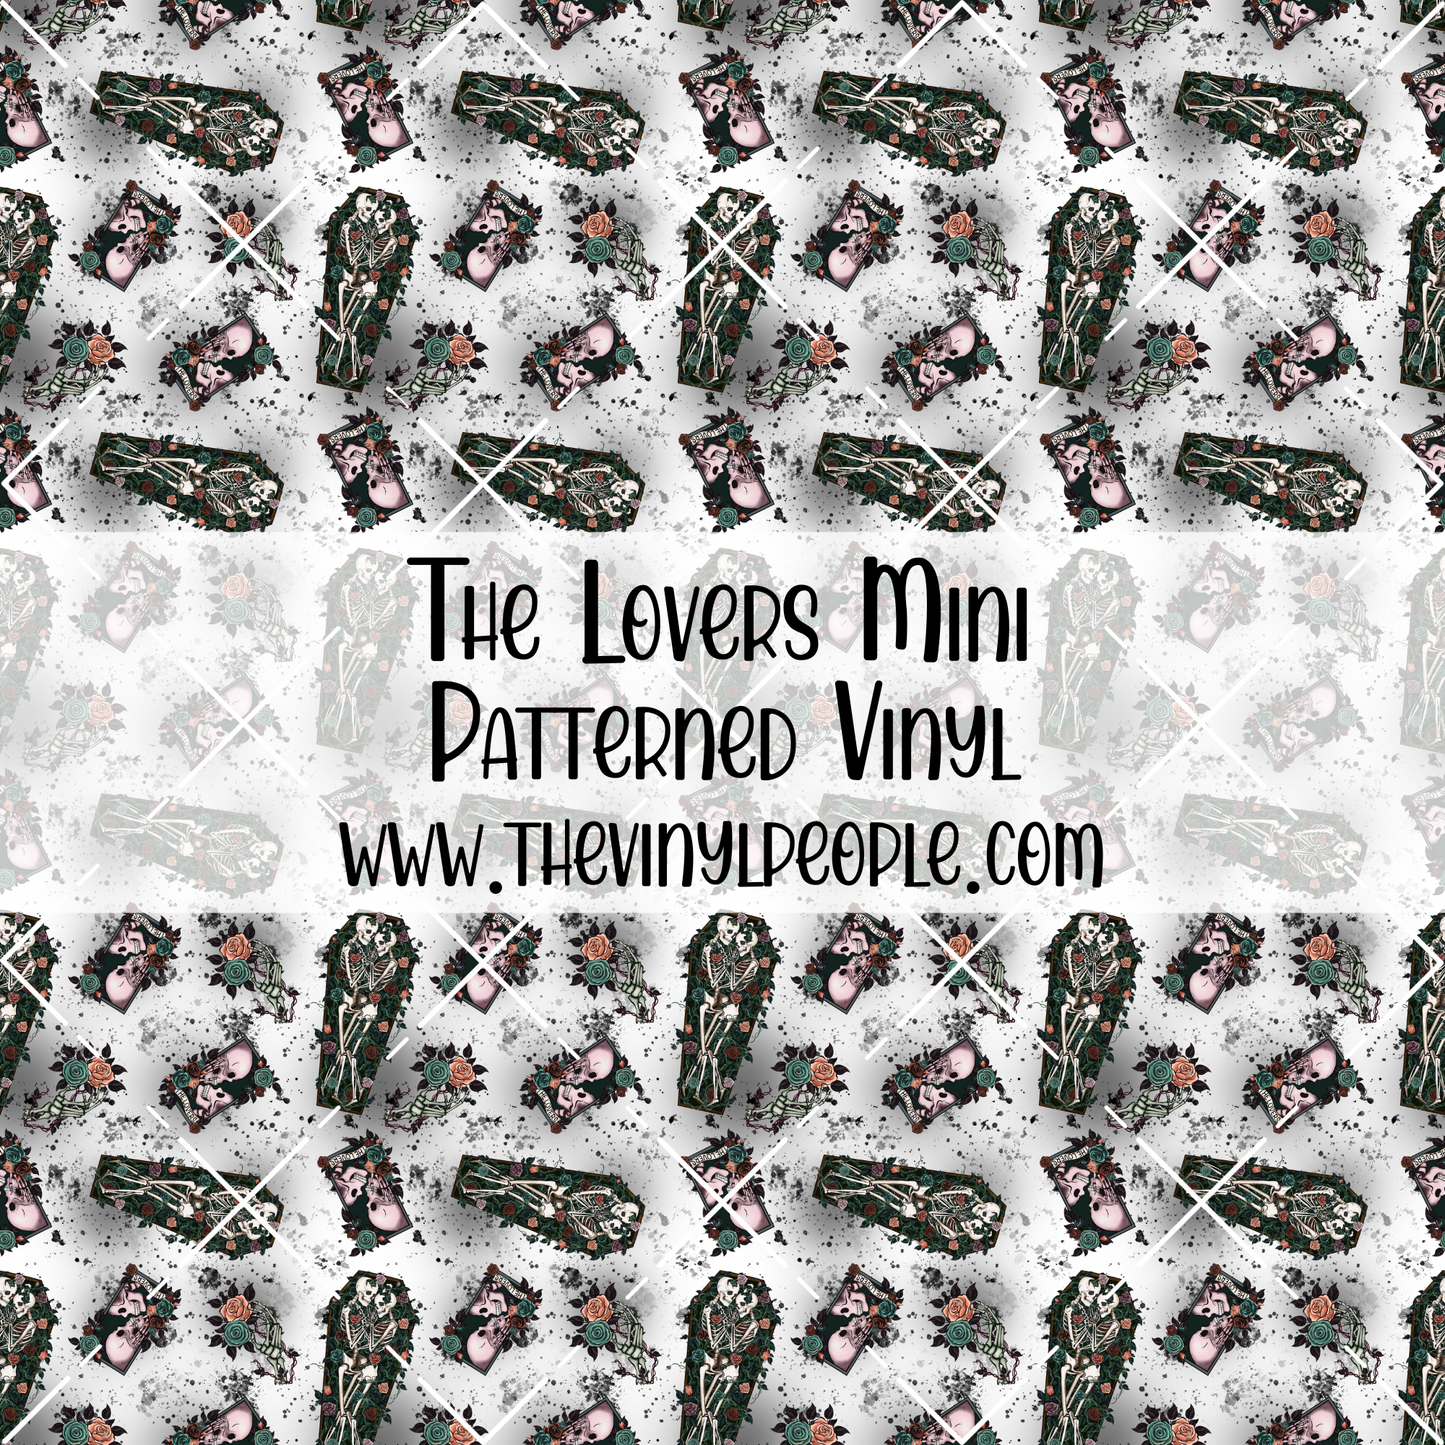 The Lovers Patterned Vinyl